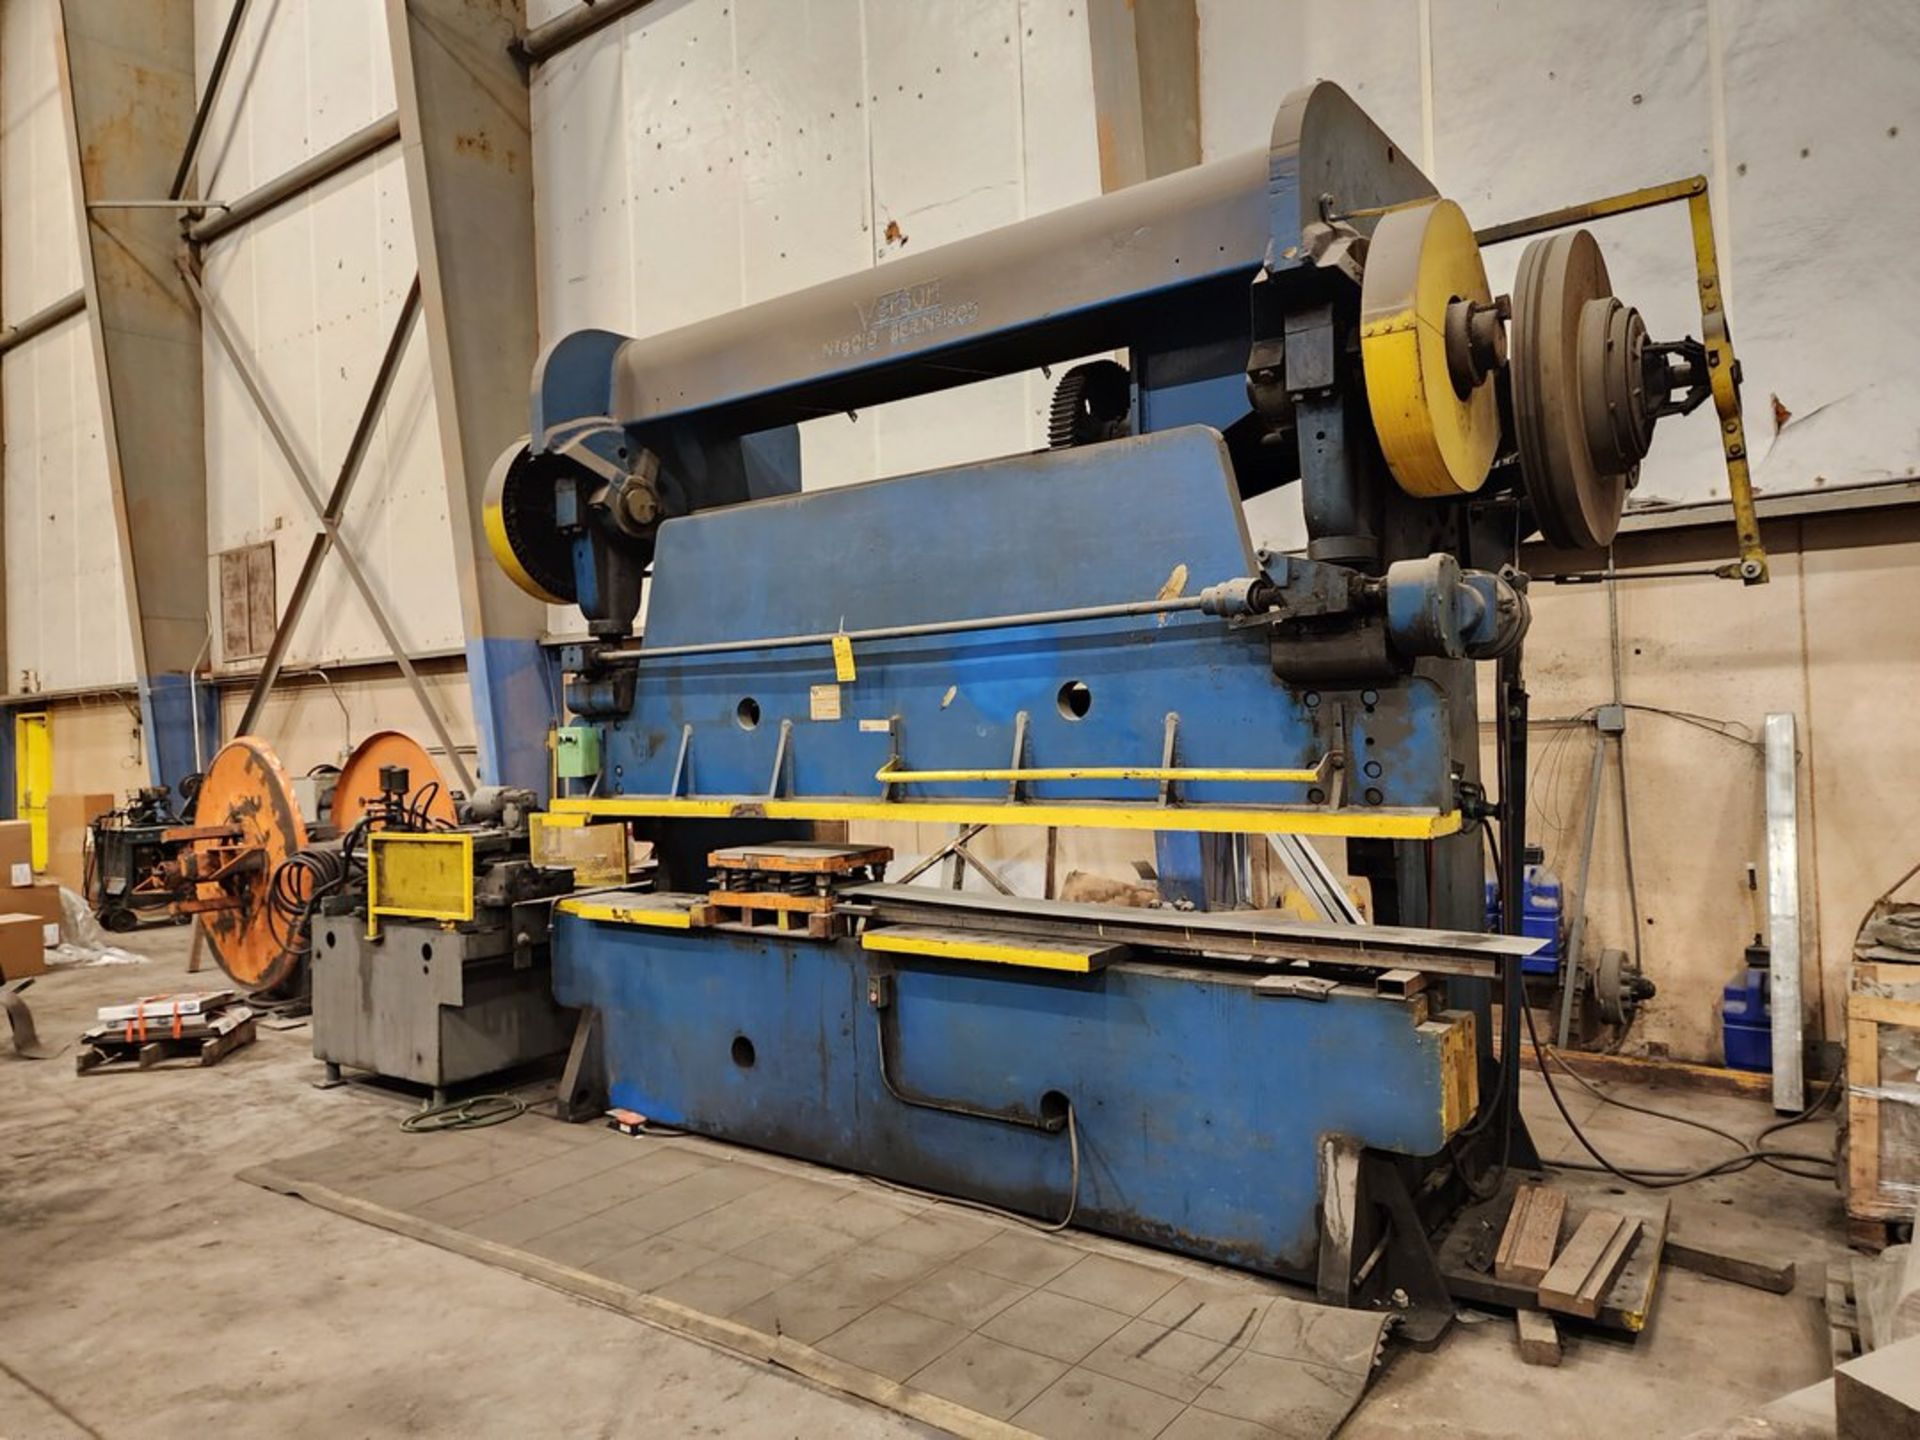 Verson 6010 60Ton Punch Press 10' Bed, W/ Foot Control, W/ Coil, W/ Stl. Plates; (No Tag); To - Image 2 of 26